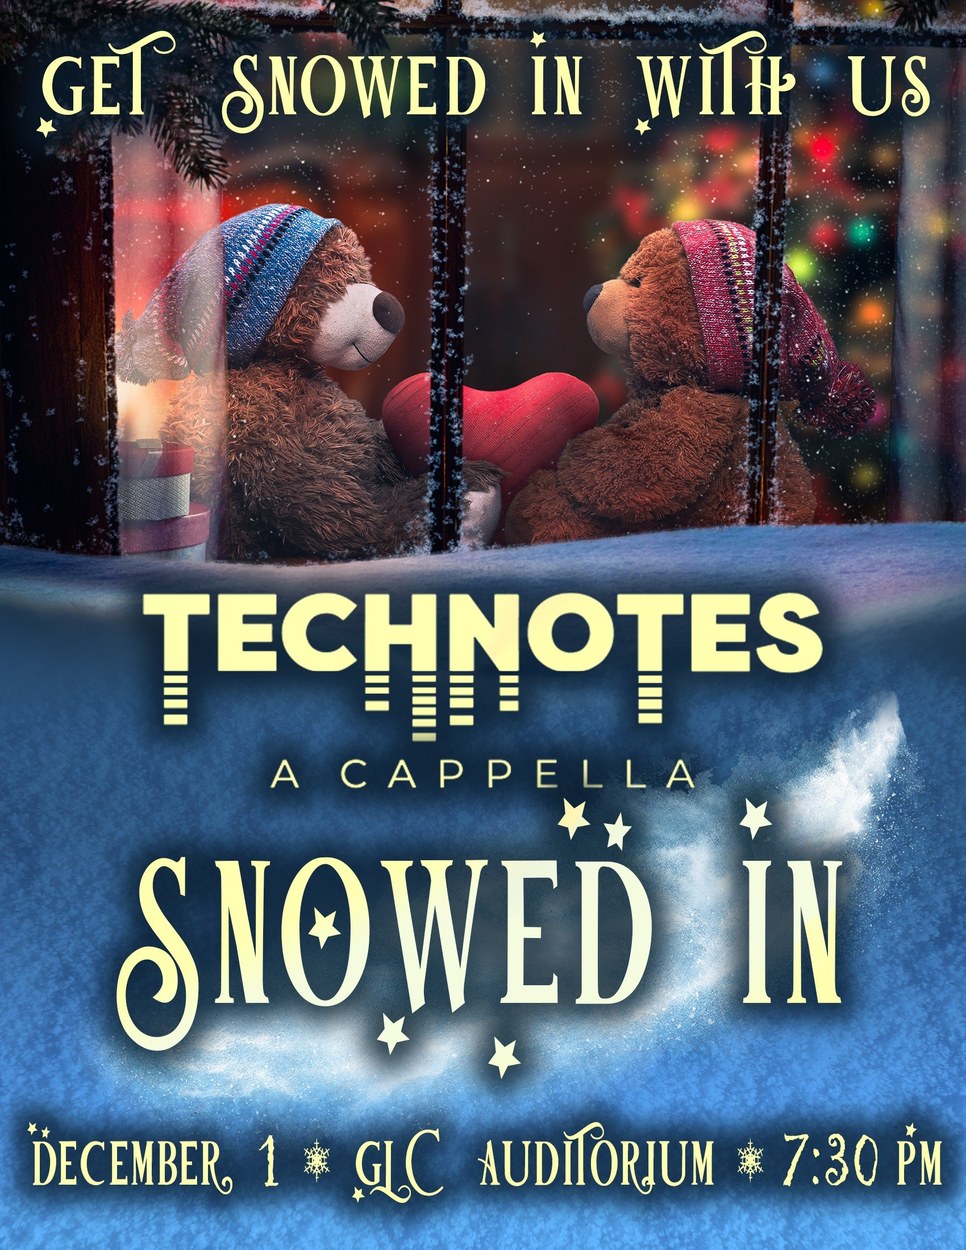 TechNotes Snowed In Concert